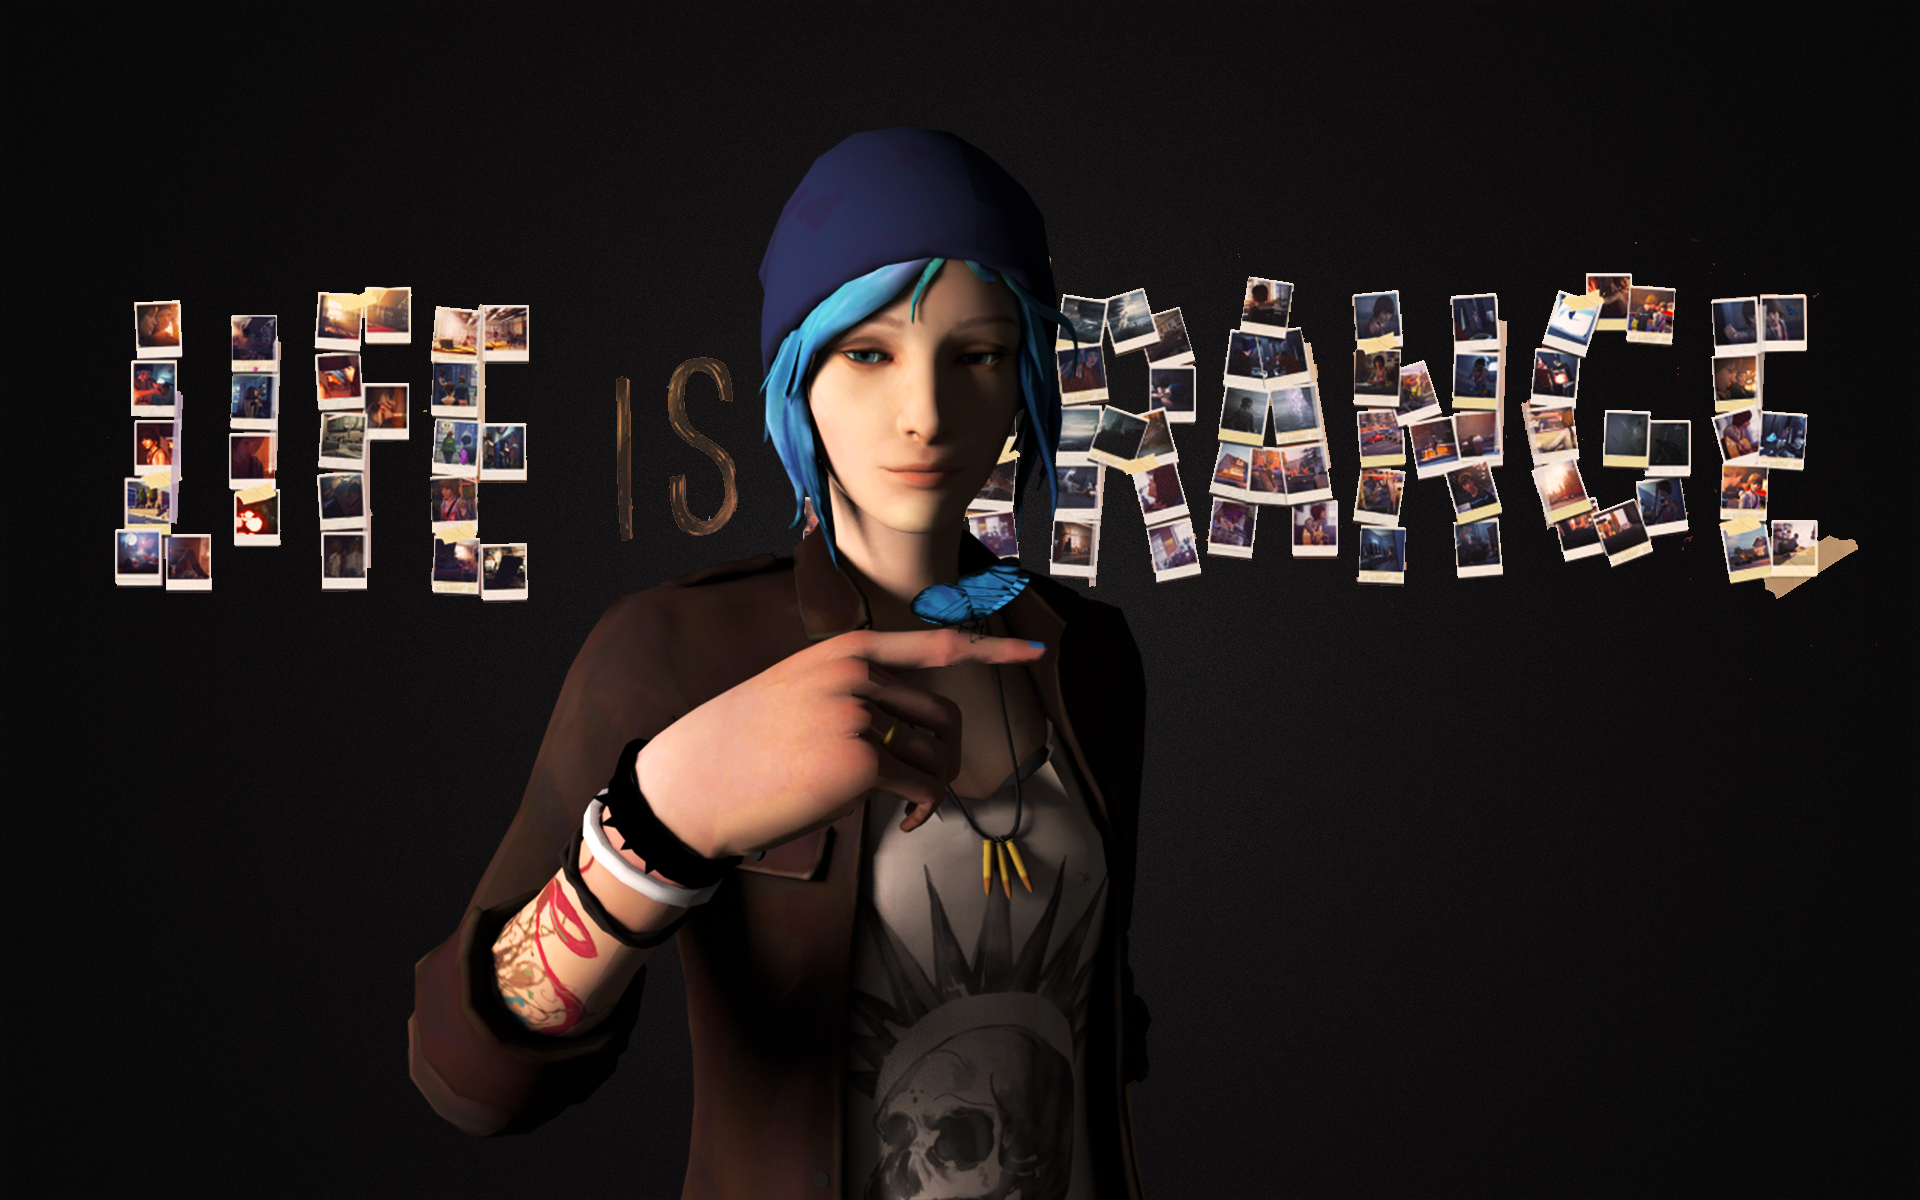 Chloe Price Life is Strange 1280x1024 Resolution HD 4k Wallpaper, Image, Background, Photo and Picture